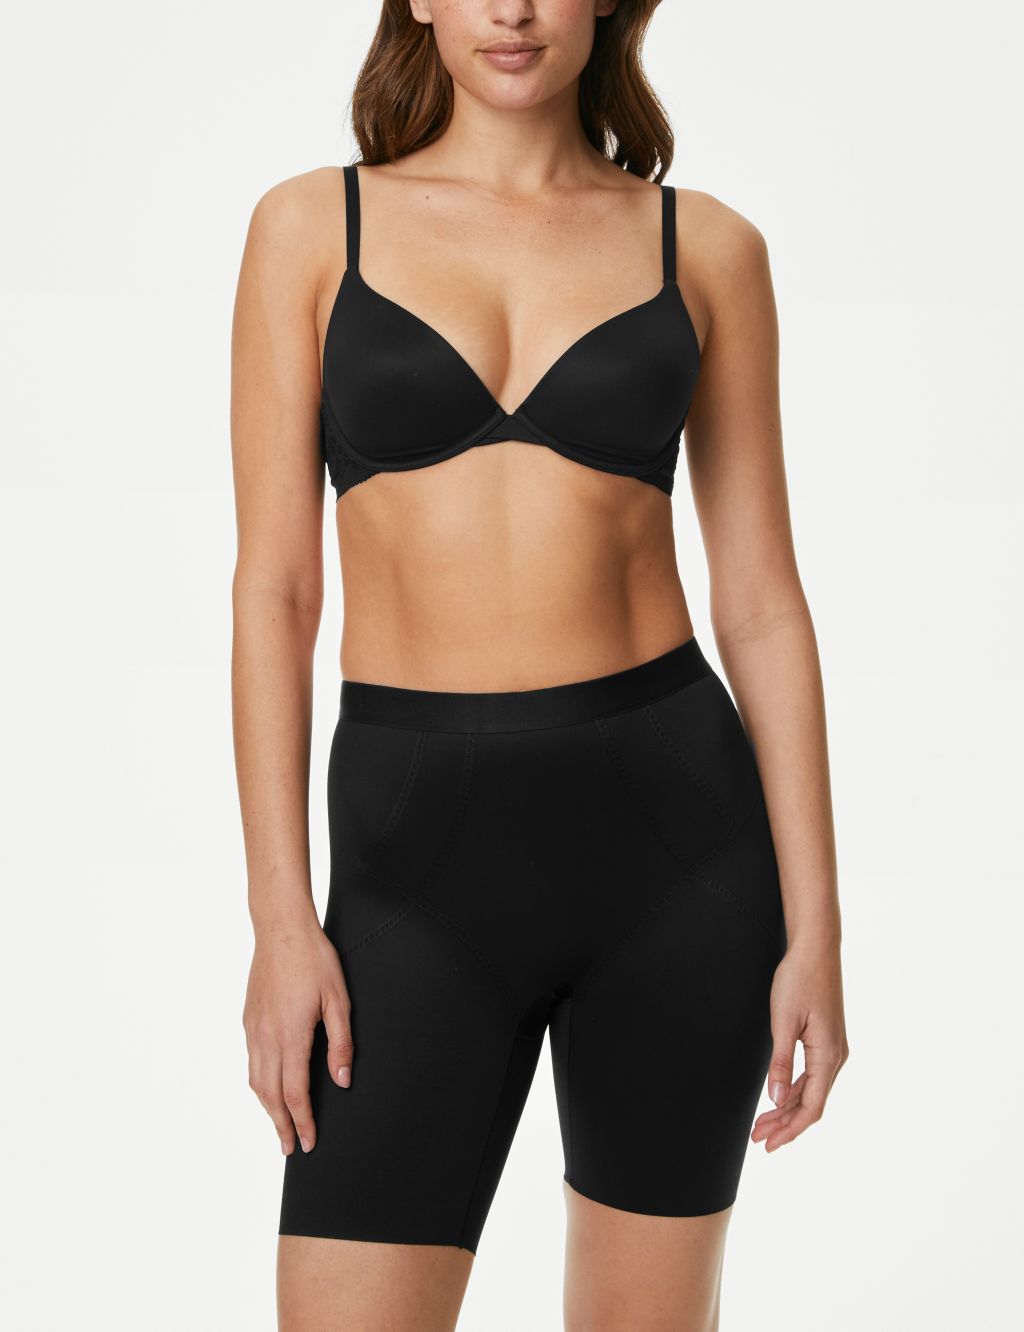 NEW M&S MAGIC WEAR FIRM ALL OVER CONTROL TO SLIM & SHAPE UNDERWIRED BODY  34B